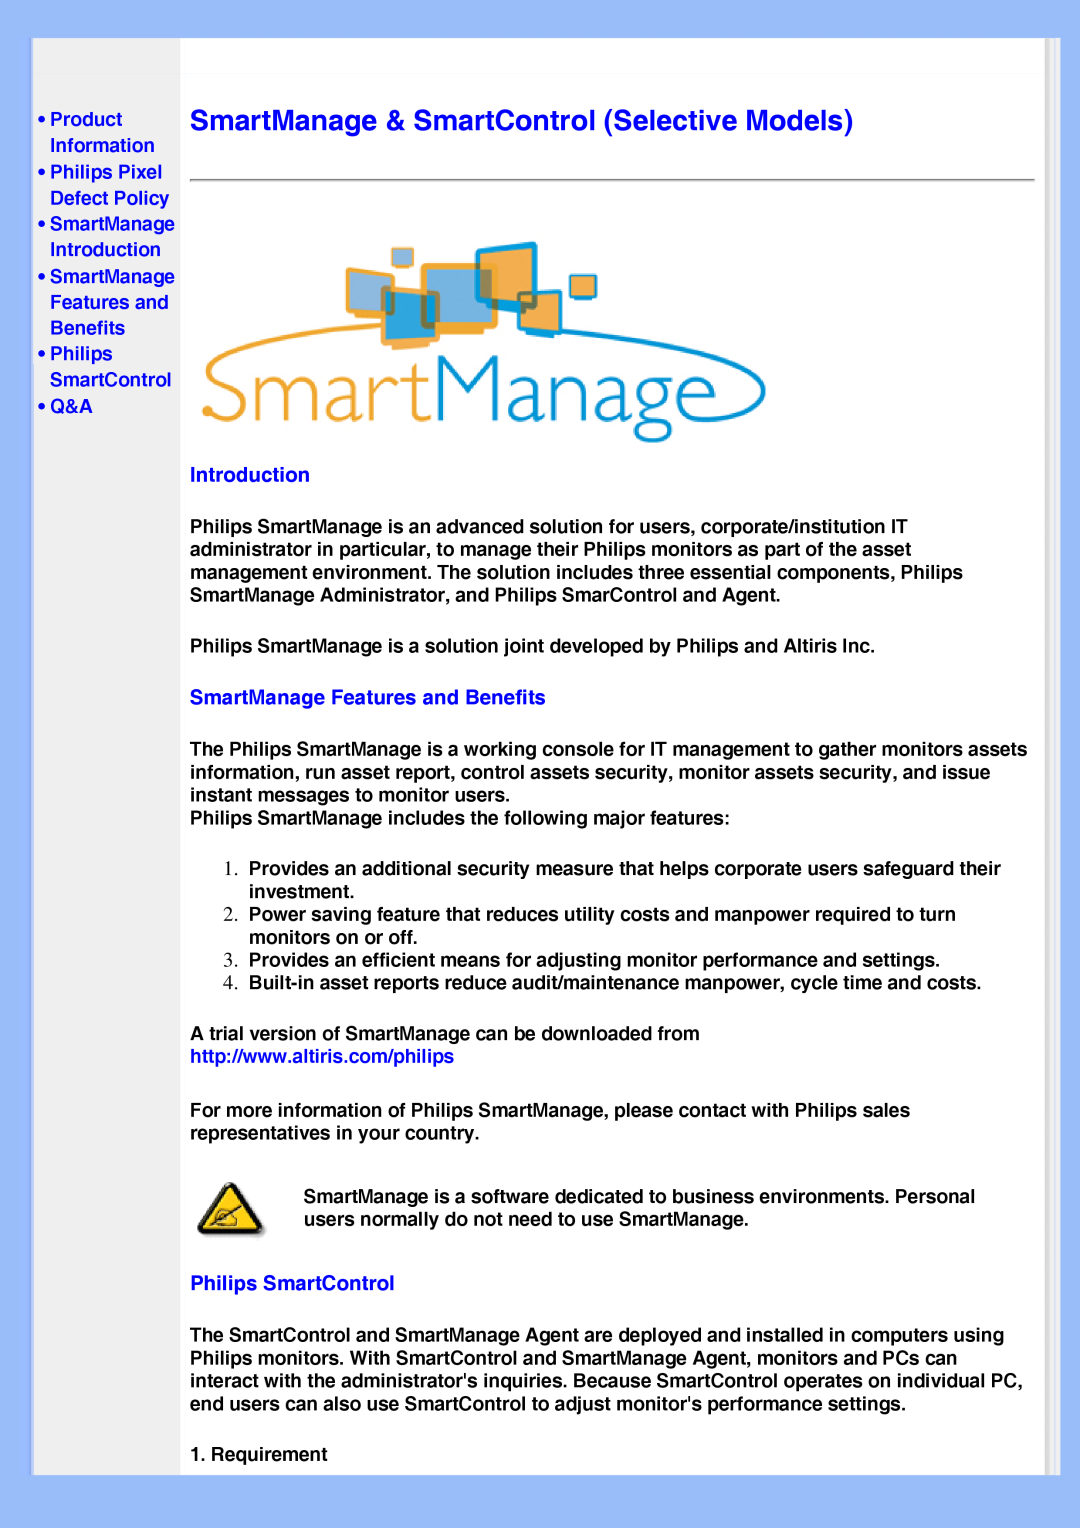 Philips 200AW8 user manual SmartManage & SmartControl Selective Models, Introduction, SmartManage Features and Benefits 